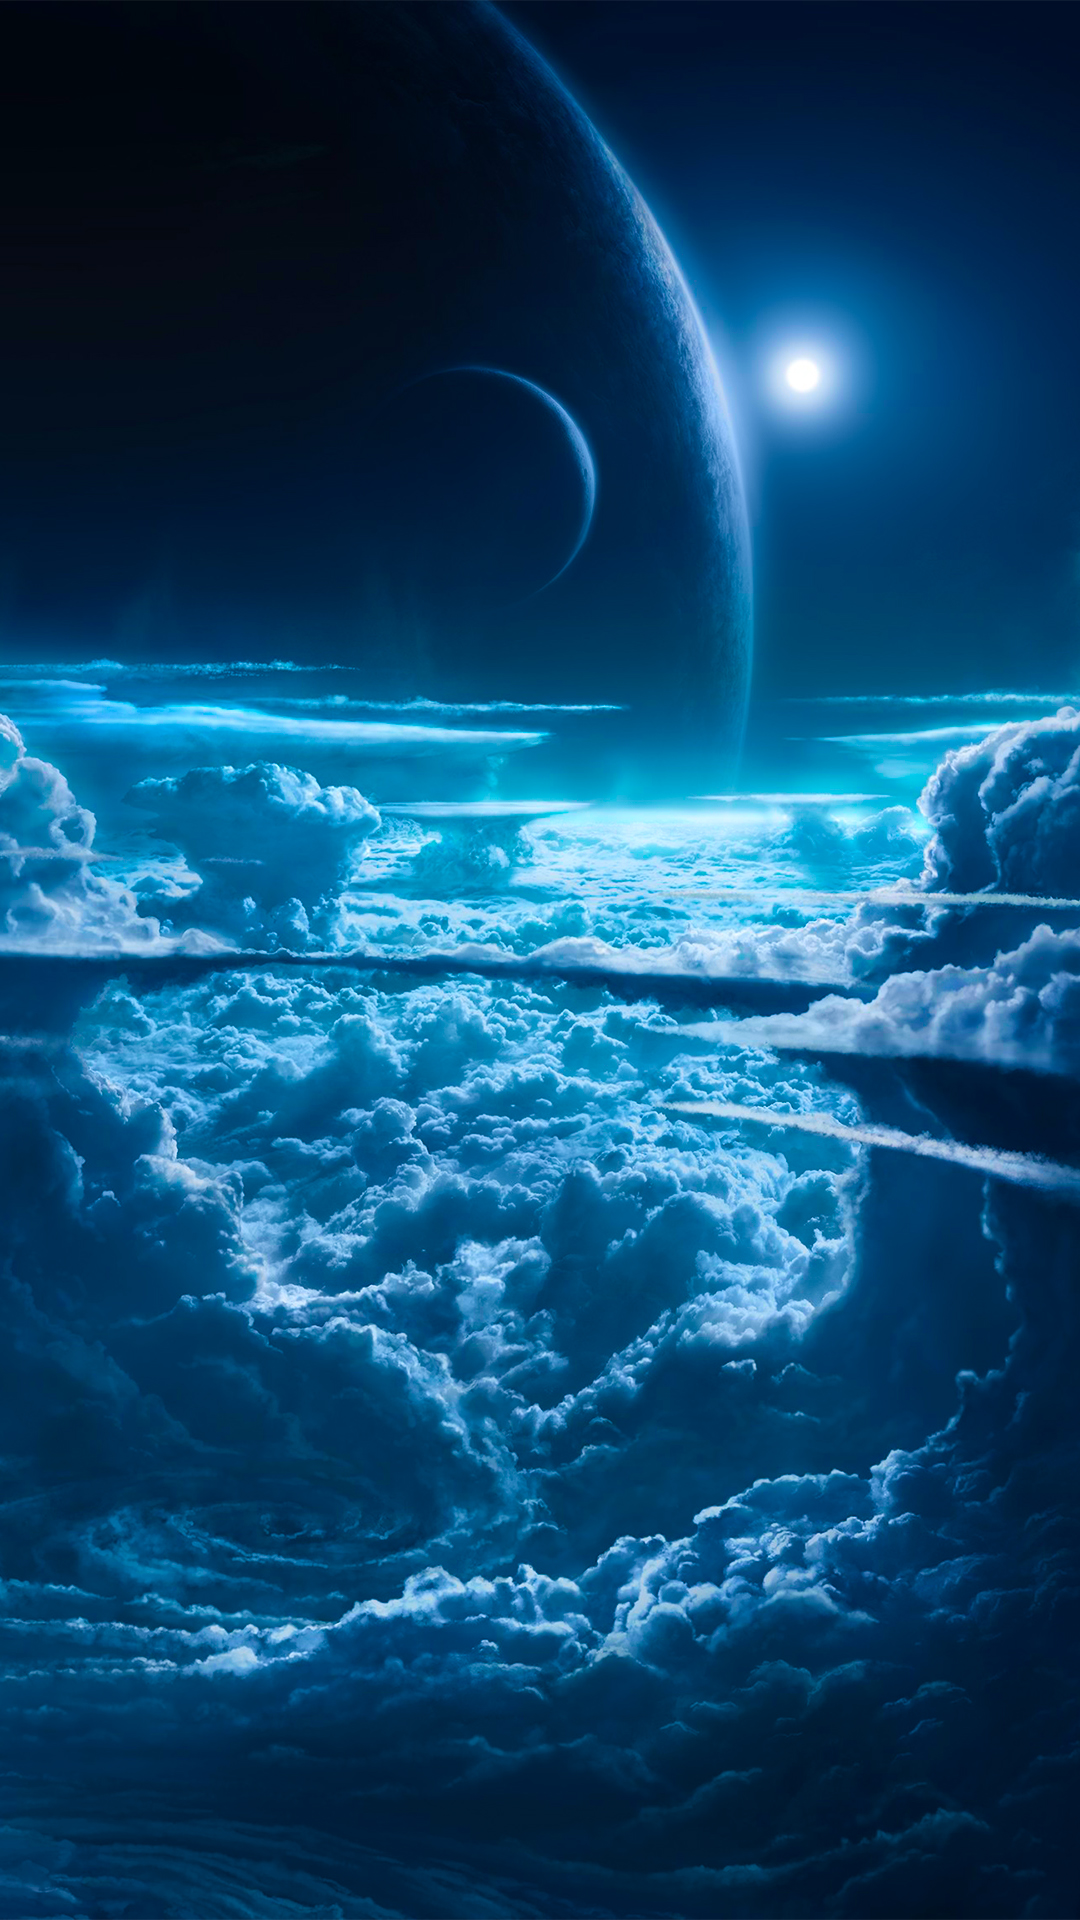 Planets and Cloud iPhone Wallpaper HD